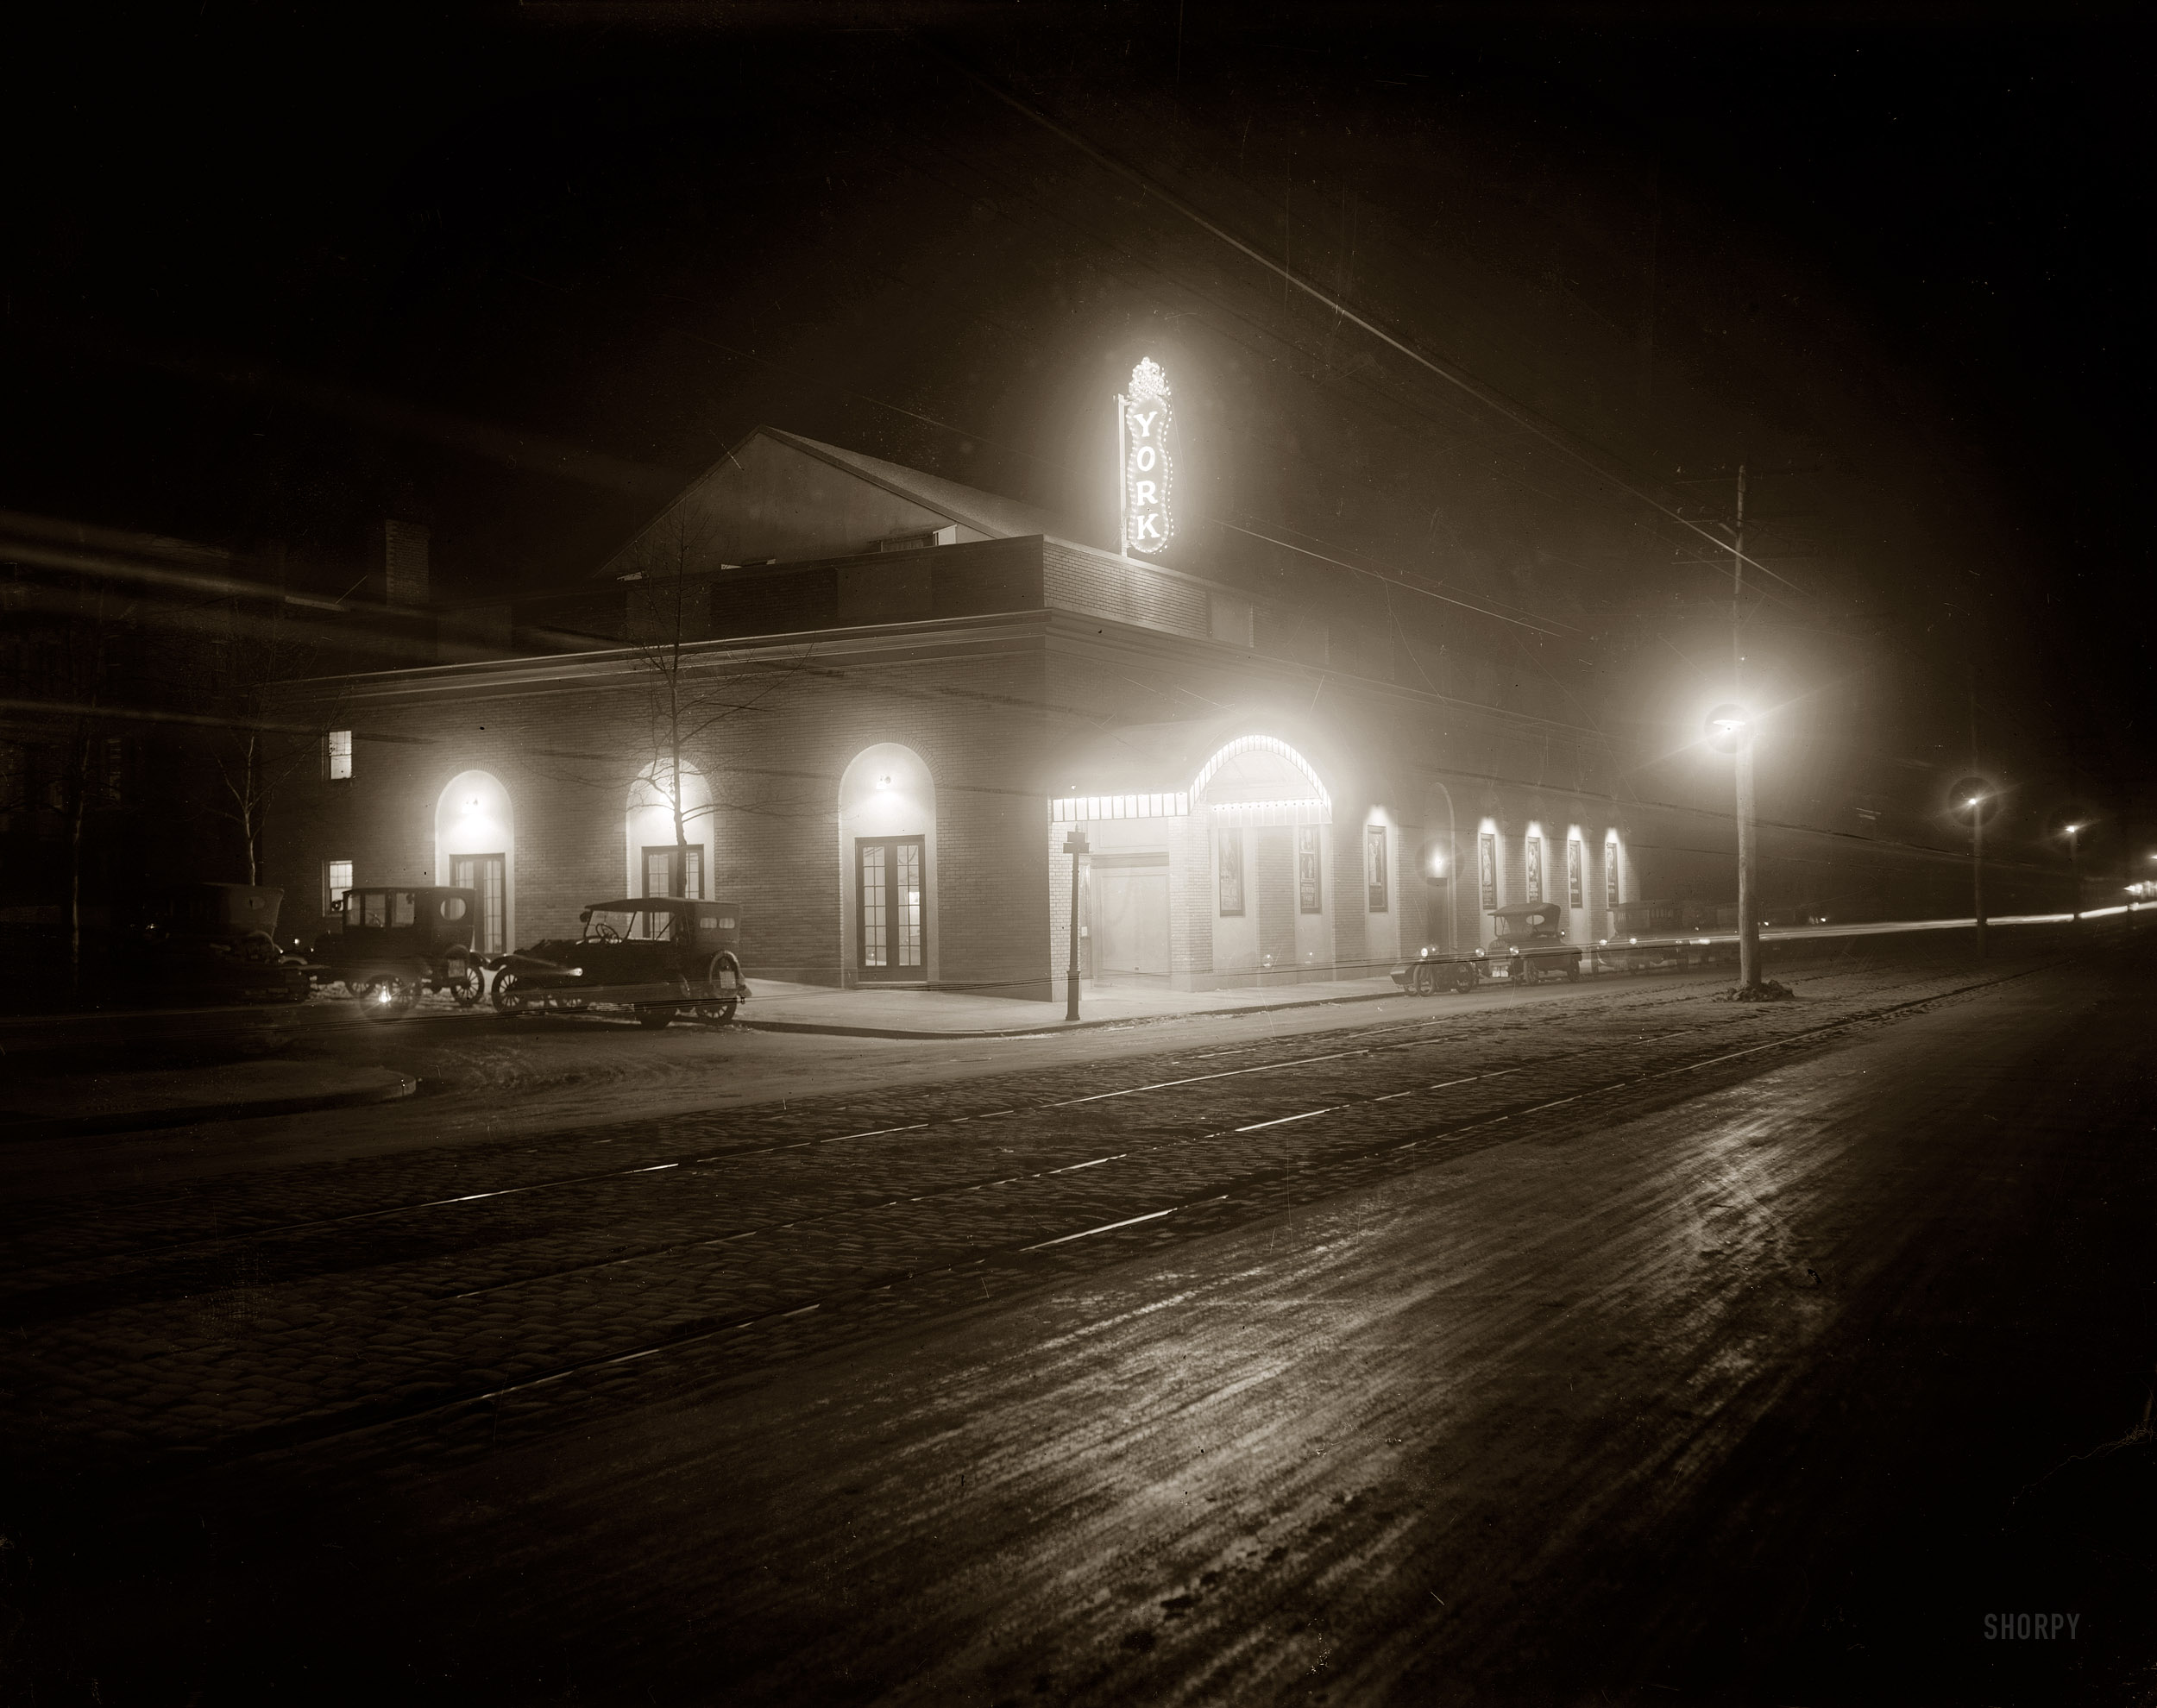 "York Theater, night." Washington, D.C., circa 1920. Among the cinematic offerings: Jack Pickford in "In Wrong." National Photo Co. View full size.